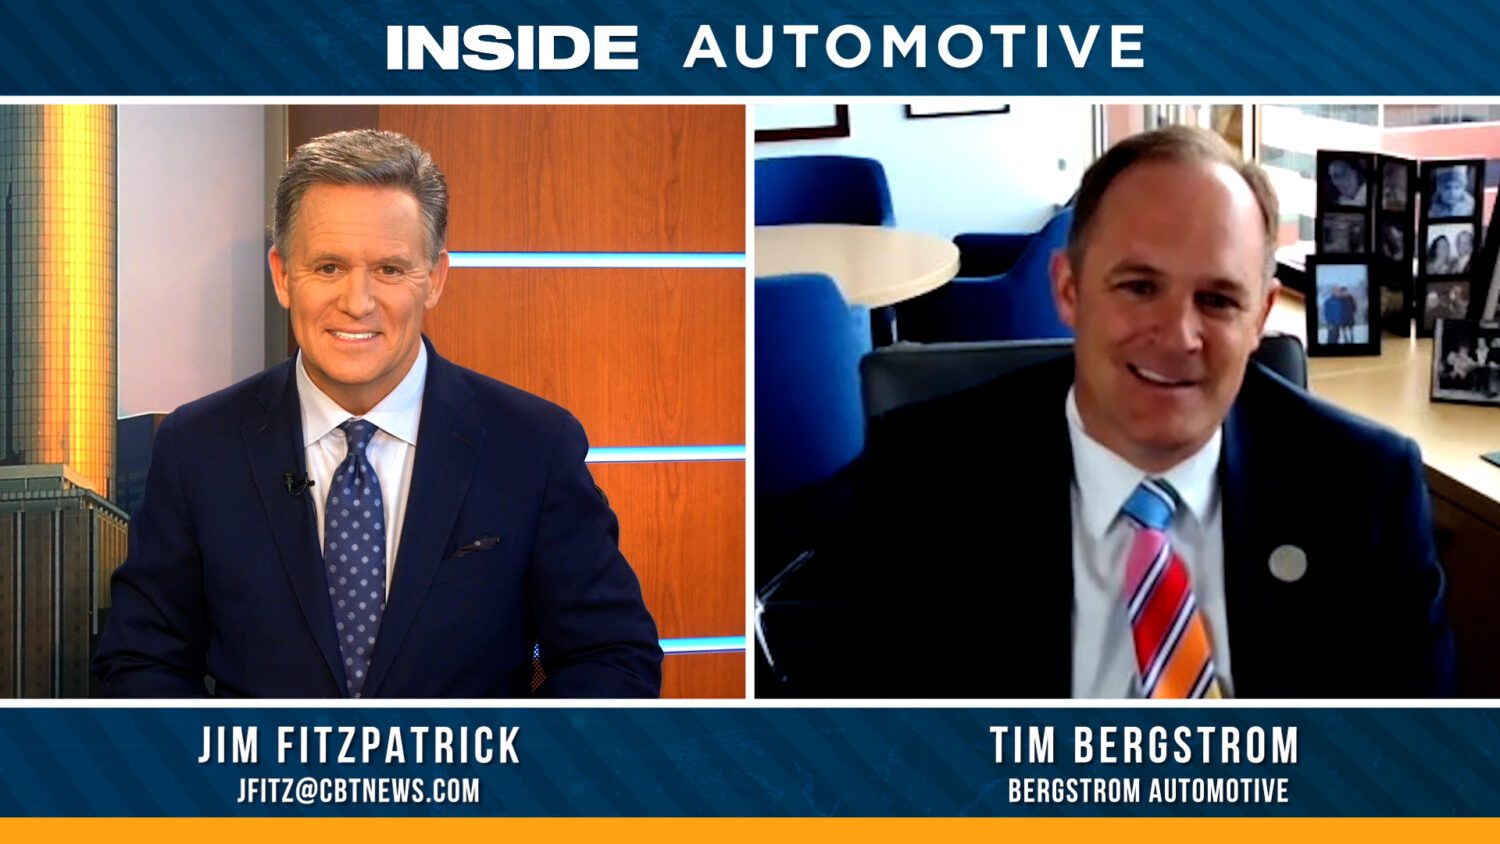 Tim Bergstrom joins Inside Automotive to discuss new automotive industry trends and how dealers are adjusting to the changed landscape.